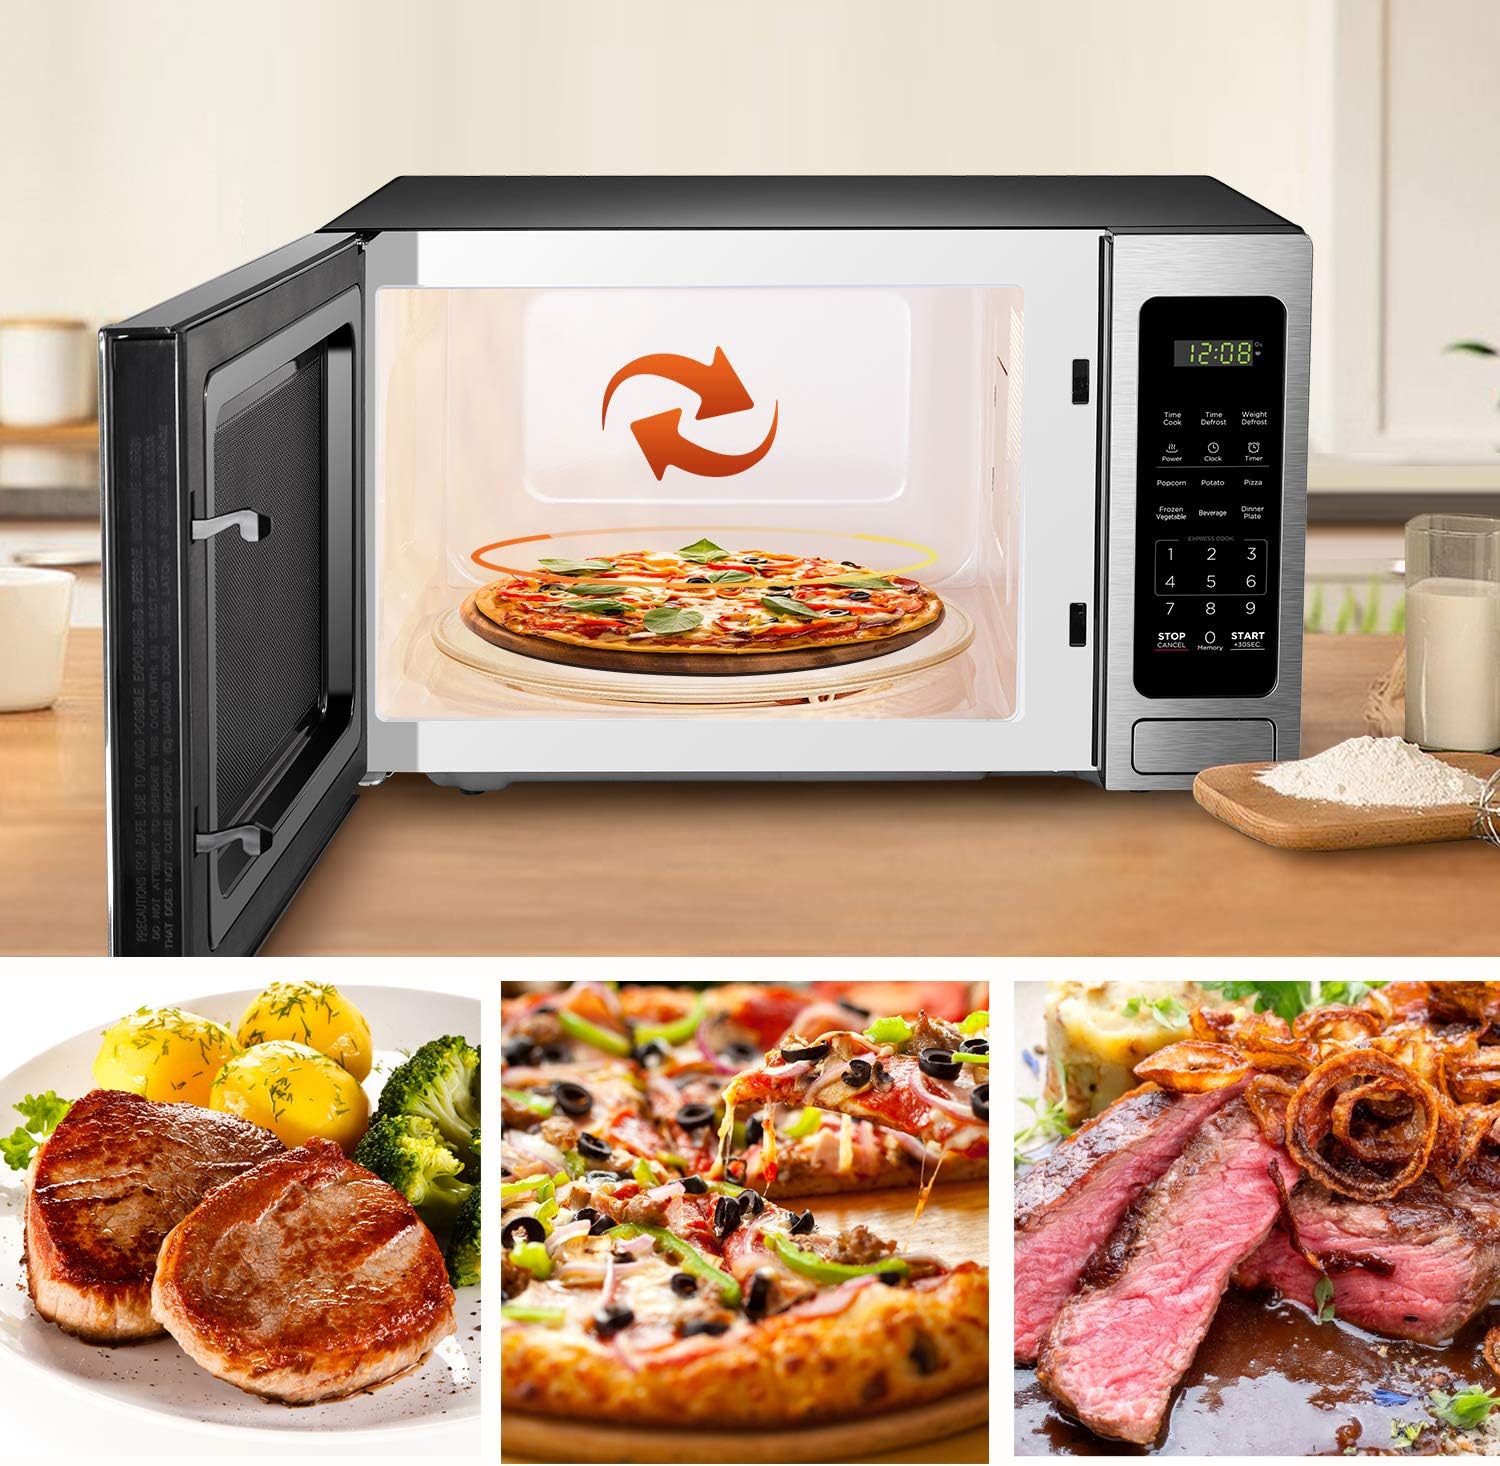 https://bigbigmart.com/wp-content/uploads/2023/07/BLACKDECKER-EM036AB14-Digital-Microwave-Oven-with-Turntable-Push-Button-Door-Child-Safety-Lock-Stainless-Steel-1.4-Cu.ft2_.jpg